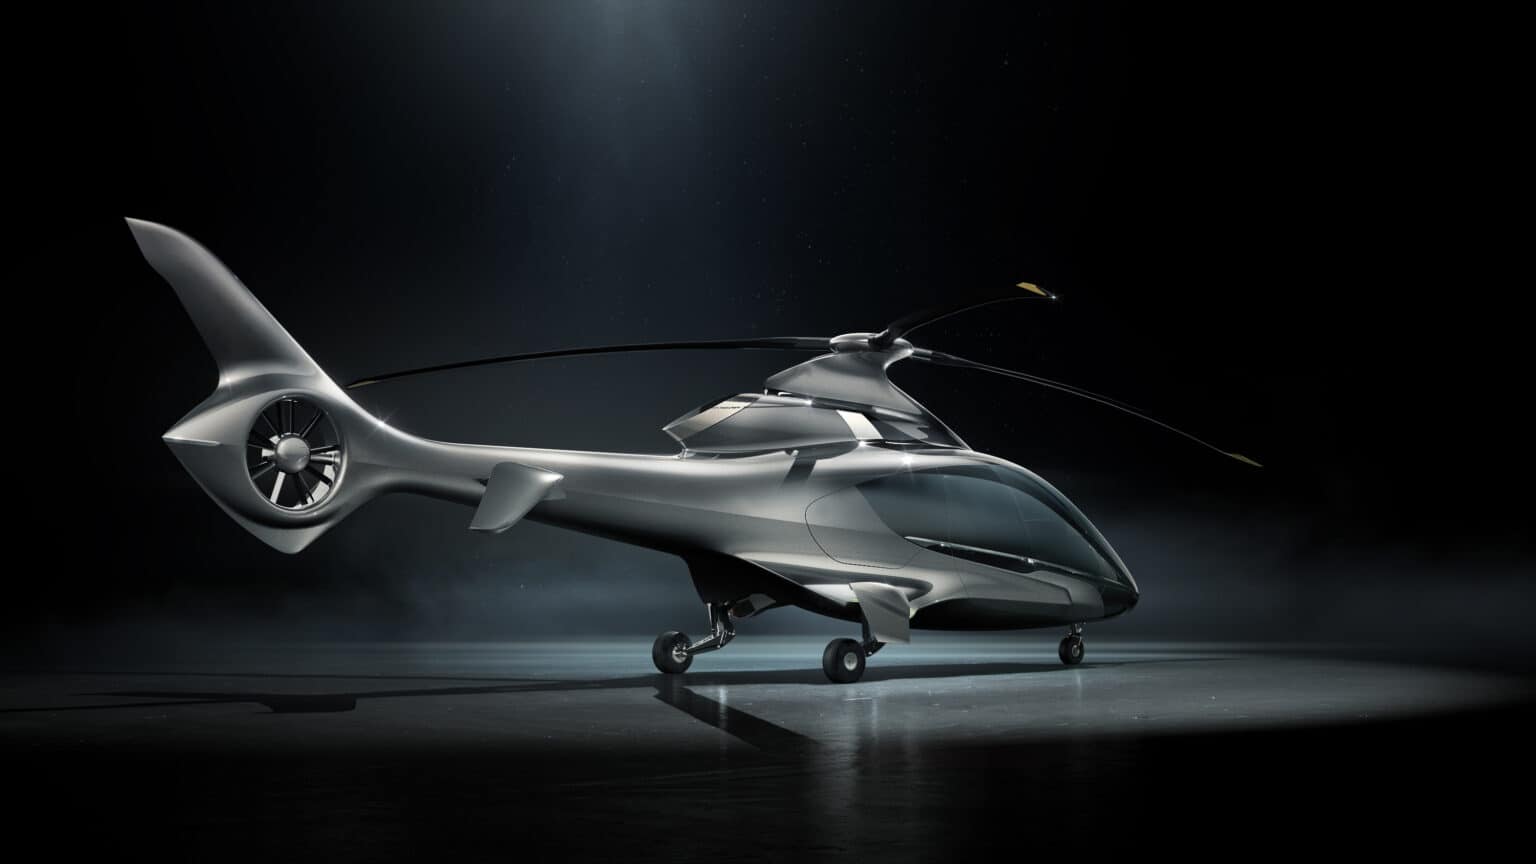 best luxury helicopter in the world